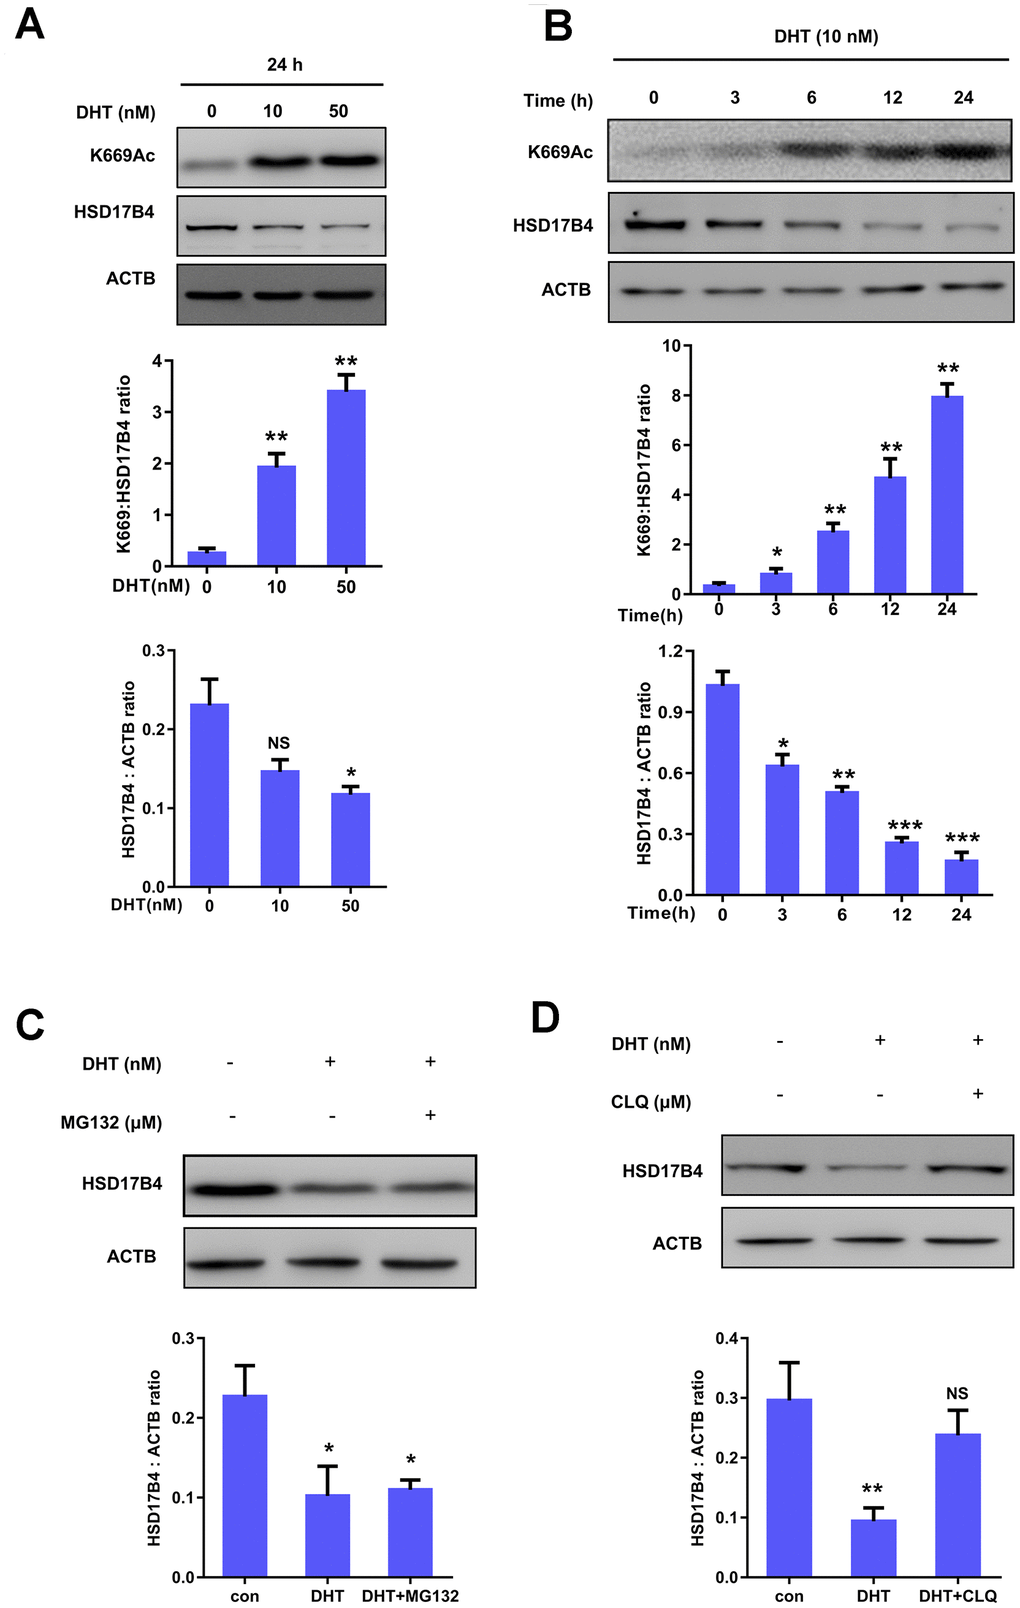 K669 acetylation of HSD17B4 promotes its degradation in PCa cells. (A) DHT treatment increases HSD17B4 K669 acetylation levels but decreases endogenous HSD17B4 protein levels in a dose-dependent manner. LNCaP cells were either untreated or treated with DHT at different concentrations as indicated. The K669 acetylation level and the protein steady-state level of HSD17B4 were determined by western blotting and normalized against ACTB (upper panel). The relative K669 protein level compared with the HSD17B4 level (middle panel) and relative HSD17B4 protein level compared with the ACTB level (lower panel) were quantified. *denotes P B) DHT treatment increases HSD17B4 K669 acetylation while decreasing its protein in a time-dependent manner. The HSD17B4 acetylation level and protein level were determined by western blotting after treatment with DHT for different lengths of time, as indicated in LNCaP cells (upper panel). The relative K669 protein level compared with the HSD17B4 level (middle panel) and relative HSD17B4 protein compared with the ACTB level (lower panel) were quantified. *denotes P **denotes P C) HSD17B4 is not degraded by the ubiquitin proteasome system (UPS). LNCaP cells were treated as indicated, and HSD17B4 protein levels were analyzed by western blotting (upper panel). Relative HSD17B4 protein compared with the ACTB level was quantified. *denotes P D) The lysosome inhibitor chloroquine (CLQ) restores HSD17B4 protein that was reduced by DHT treatment. LNCaP cells were treated with the lysosome inhibitor CLQ, and the HSD17B4 protein level was analyzed by western blotting (upper panel). The relative HSD17B4 protein compared with the ACTB level was quantified. **denotes P 